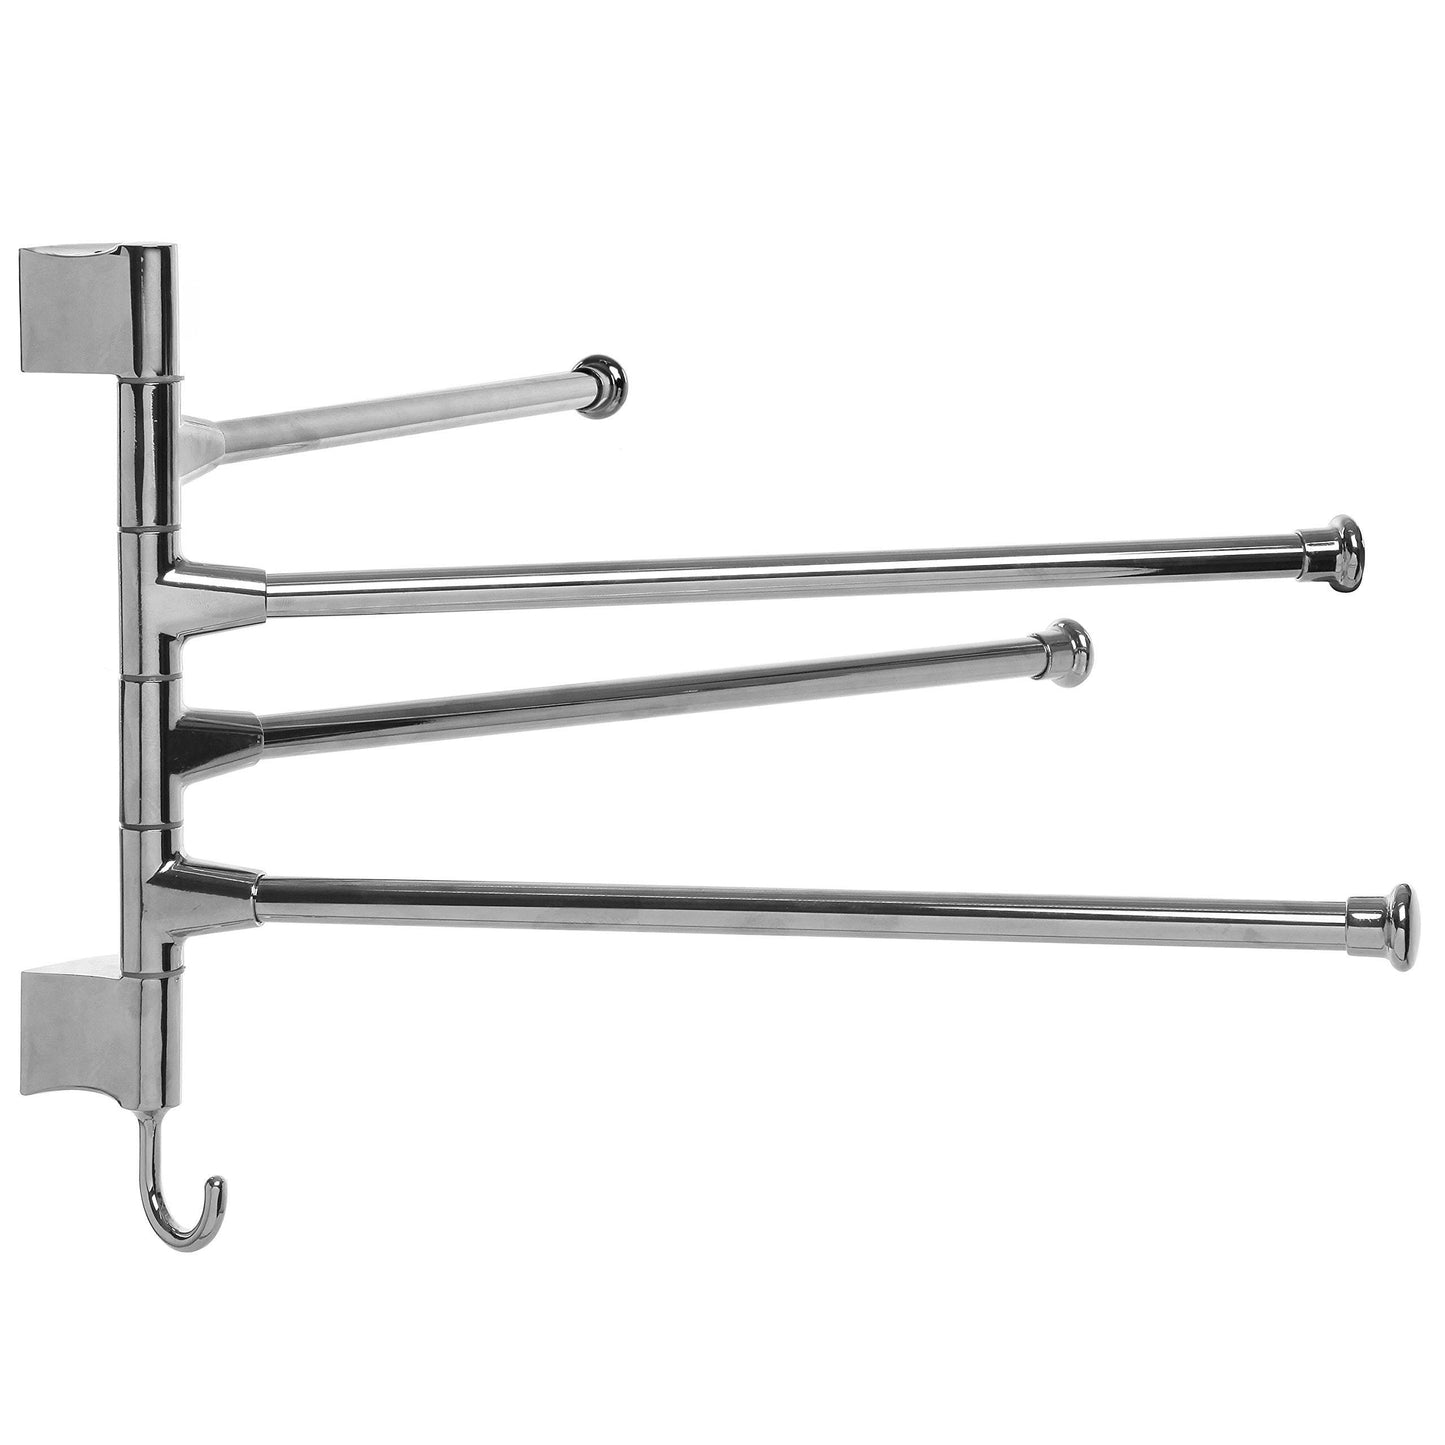 Order now mygift wall mounted stainless steel swivel towel bar 4 swing arm hand towel drying rack for bathroom and kitchen